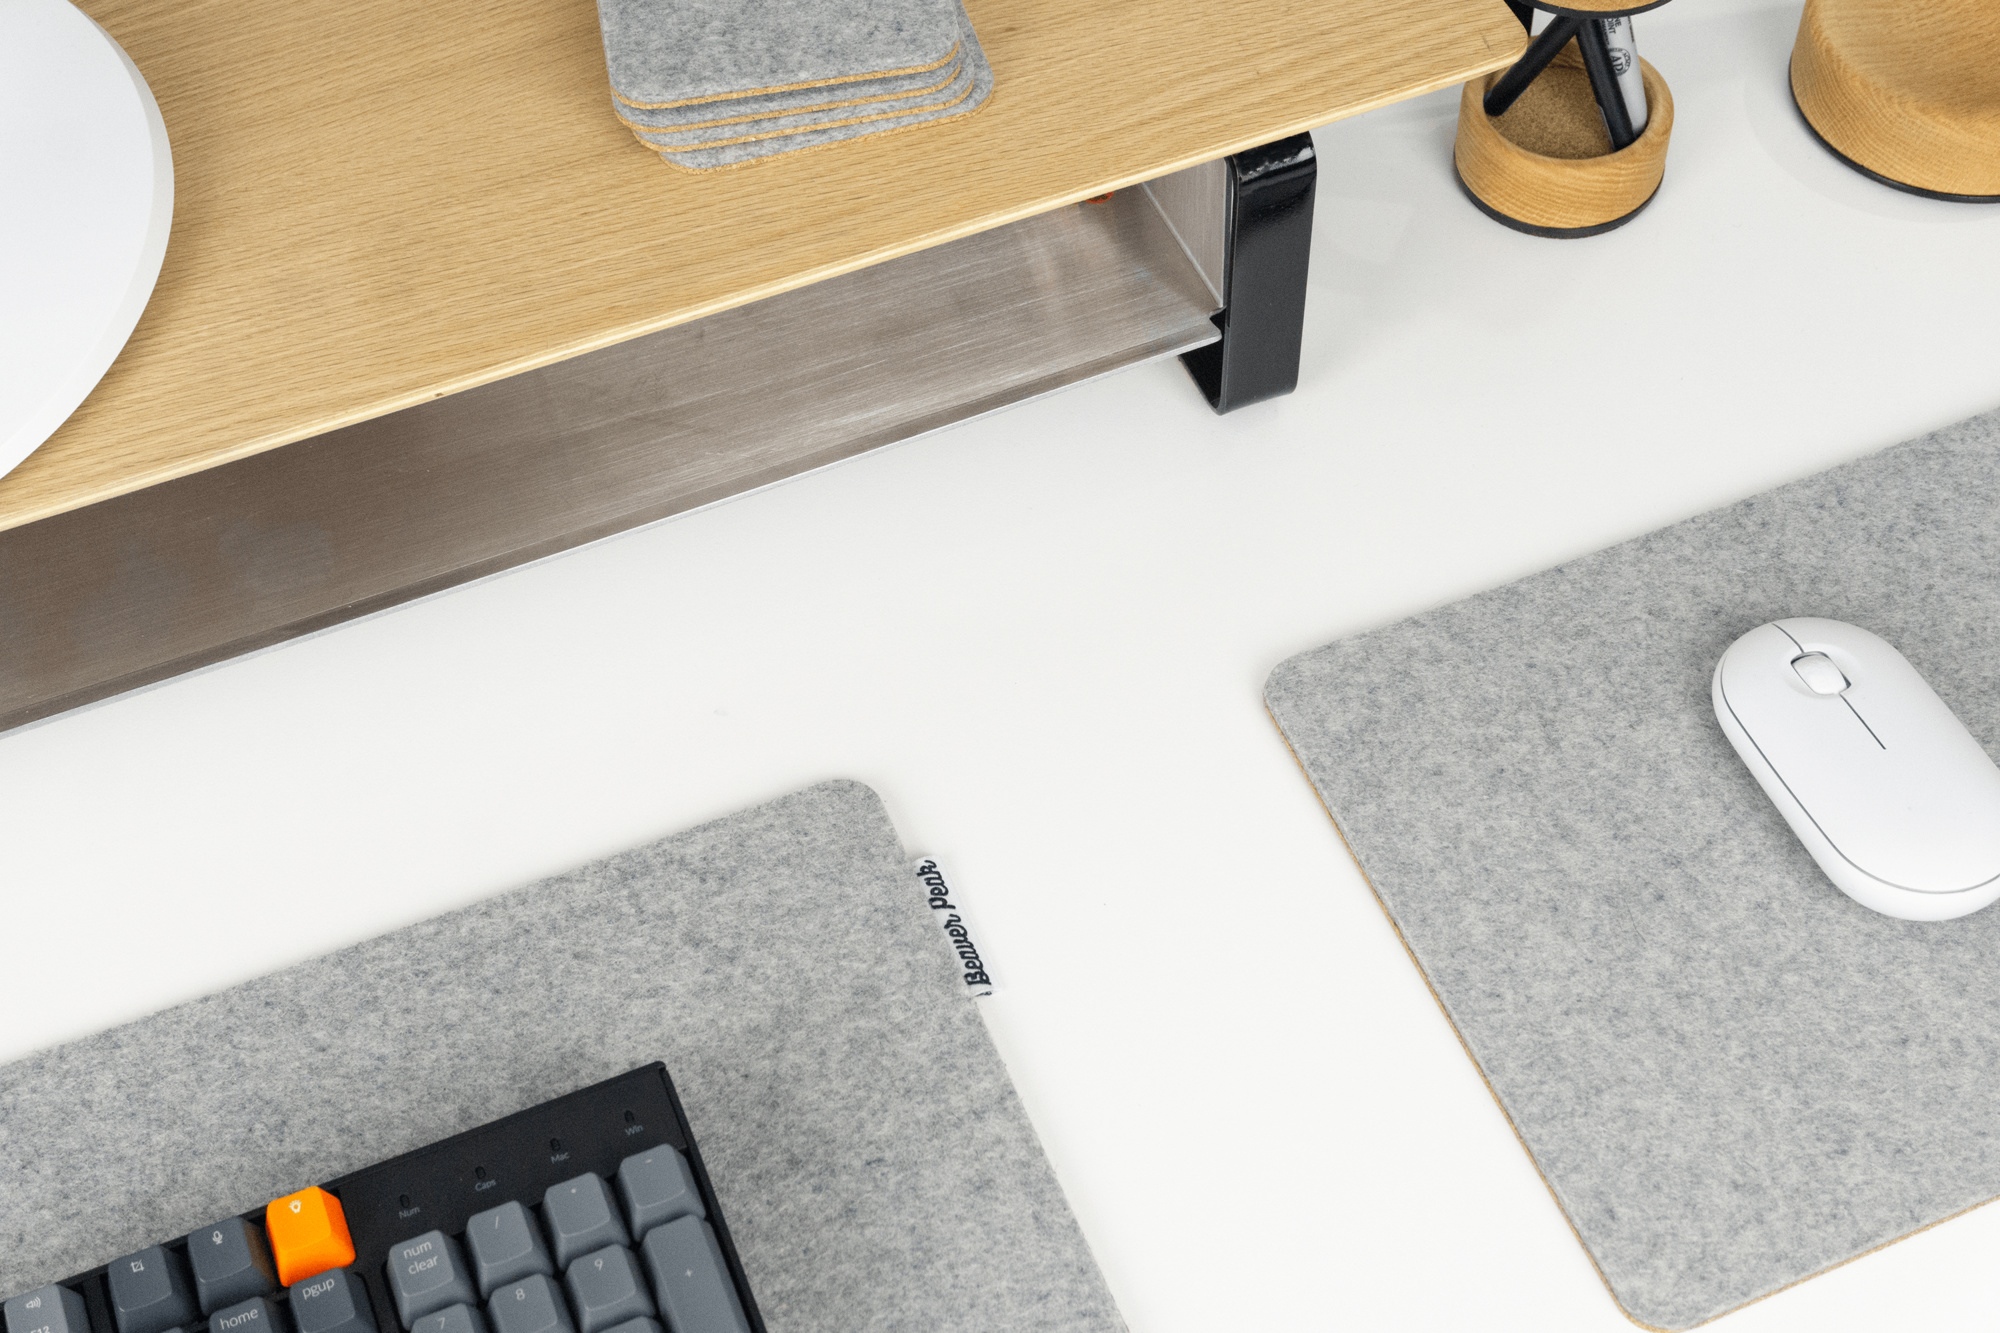 Grey wool desk pad next to matching grey mouse pad. With mechanical keyboard and white mouse.